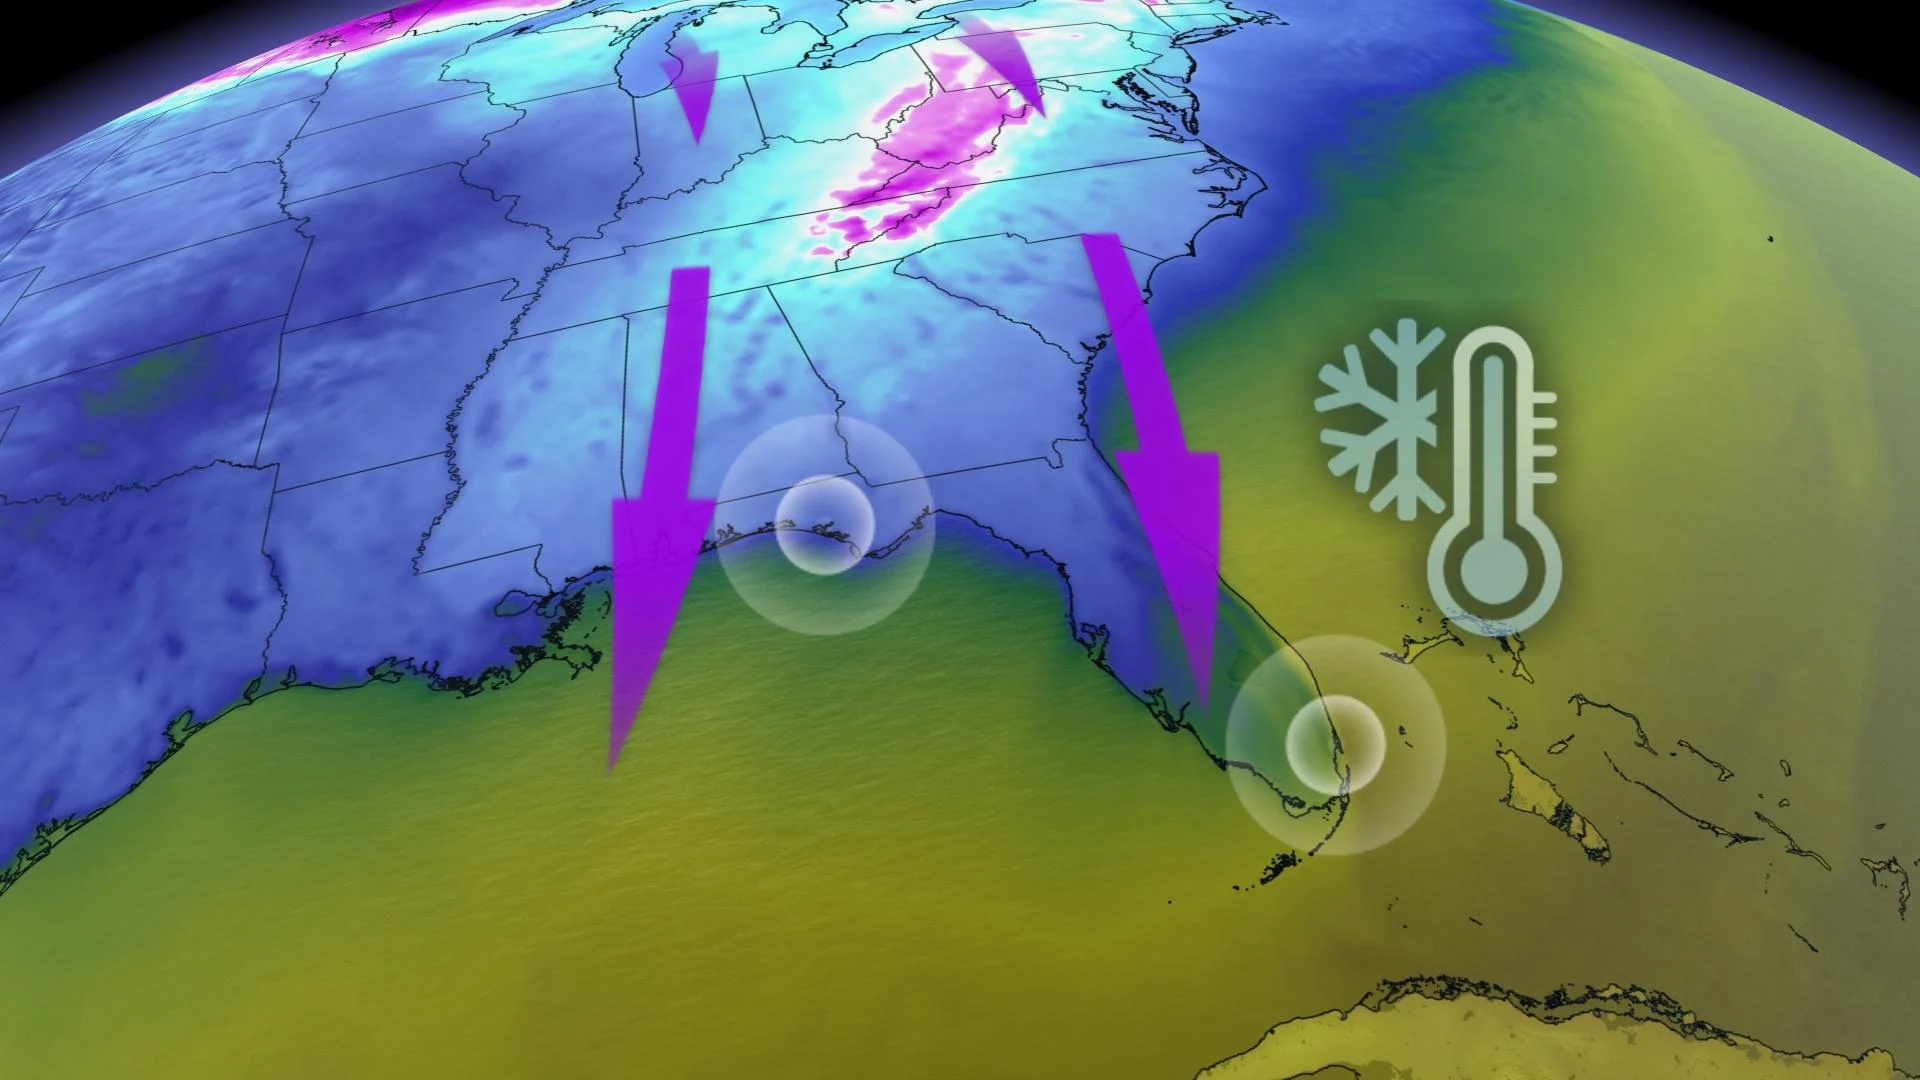 Unfortunate timing: March Breakers see 0°C weather in parts of Florida